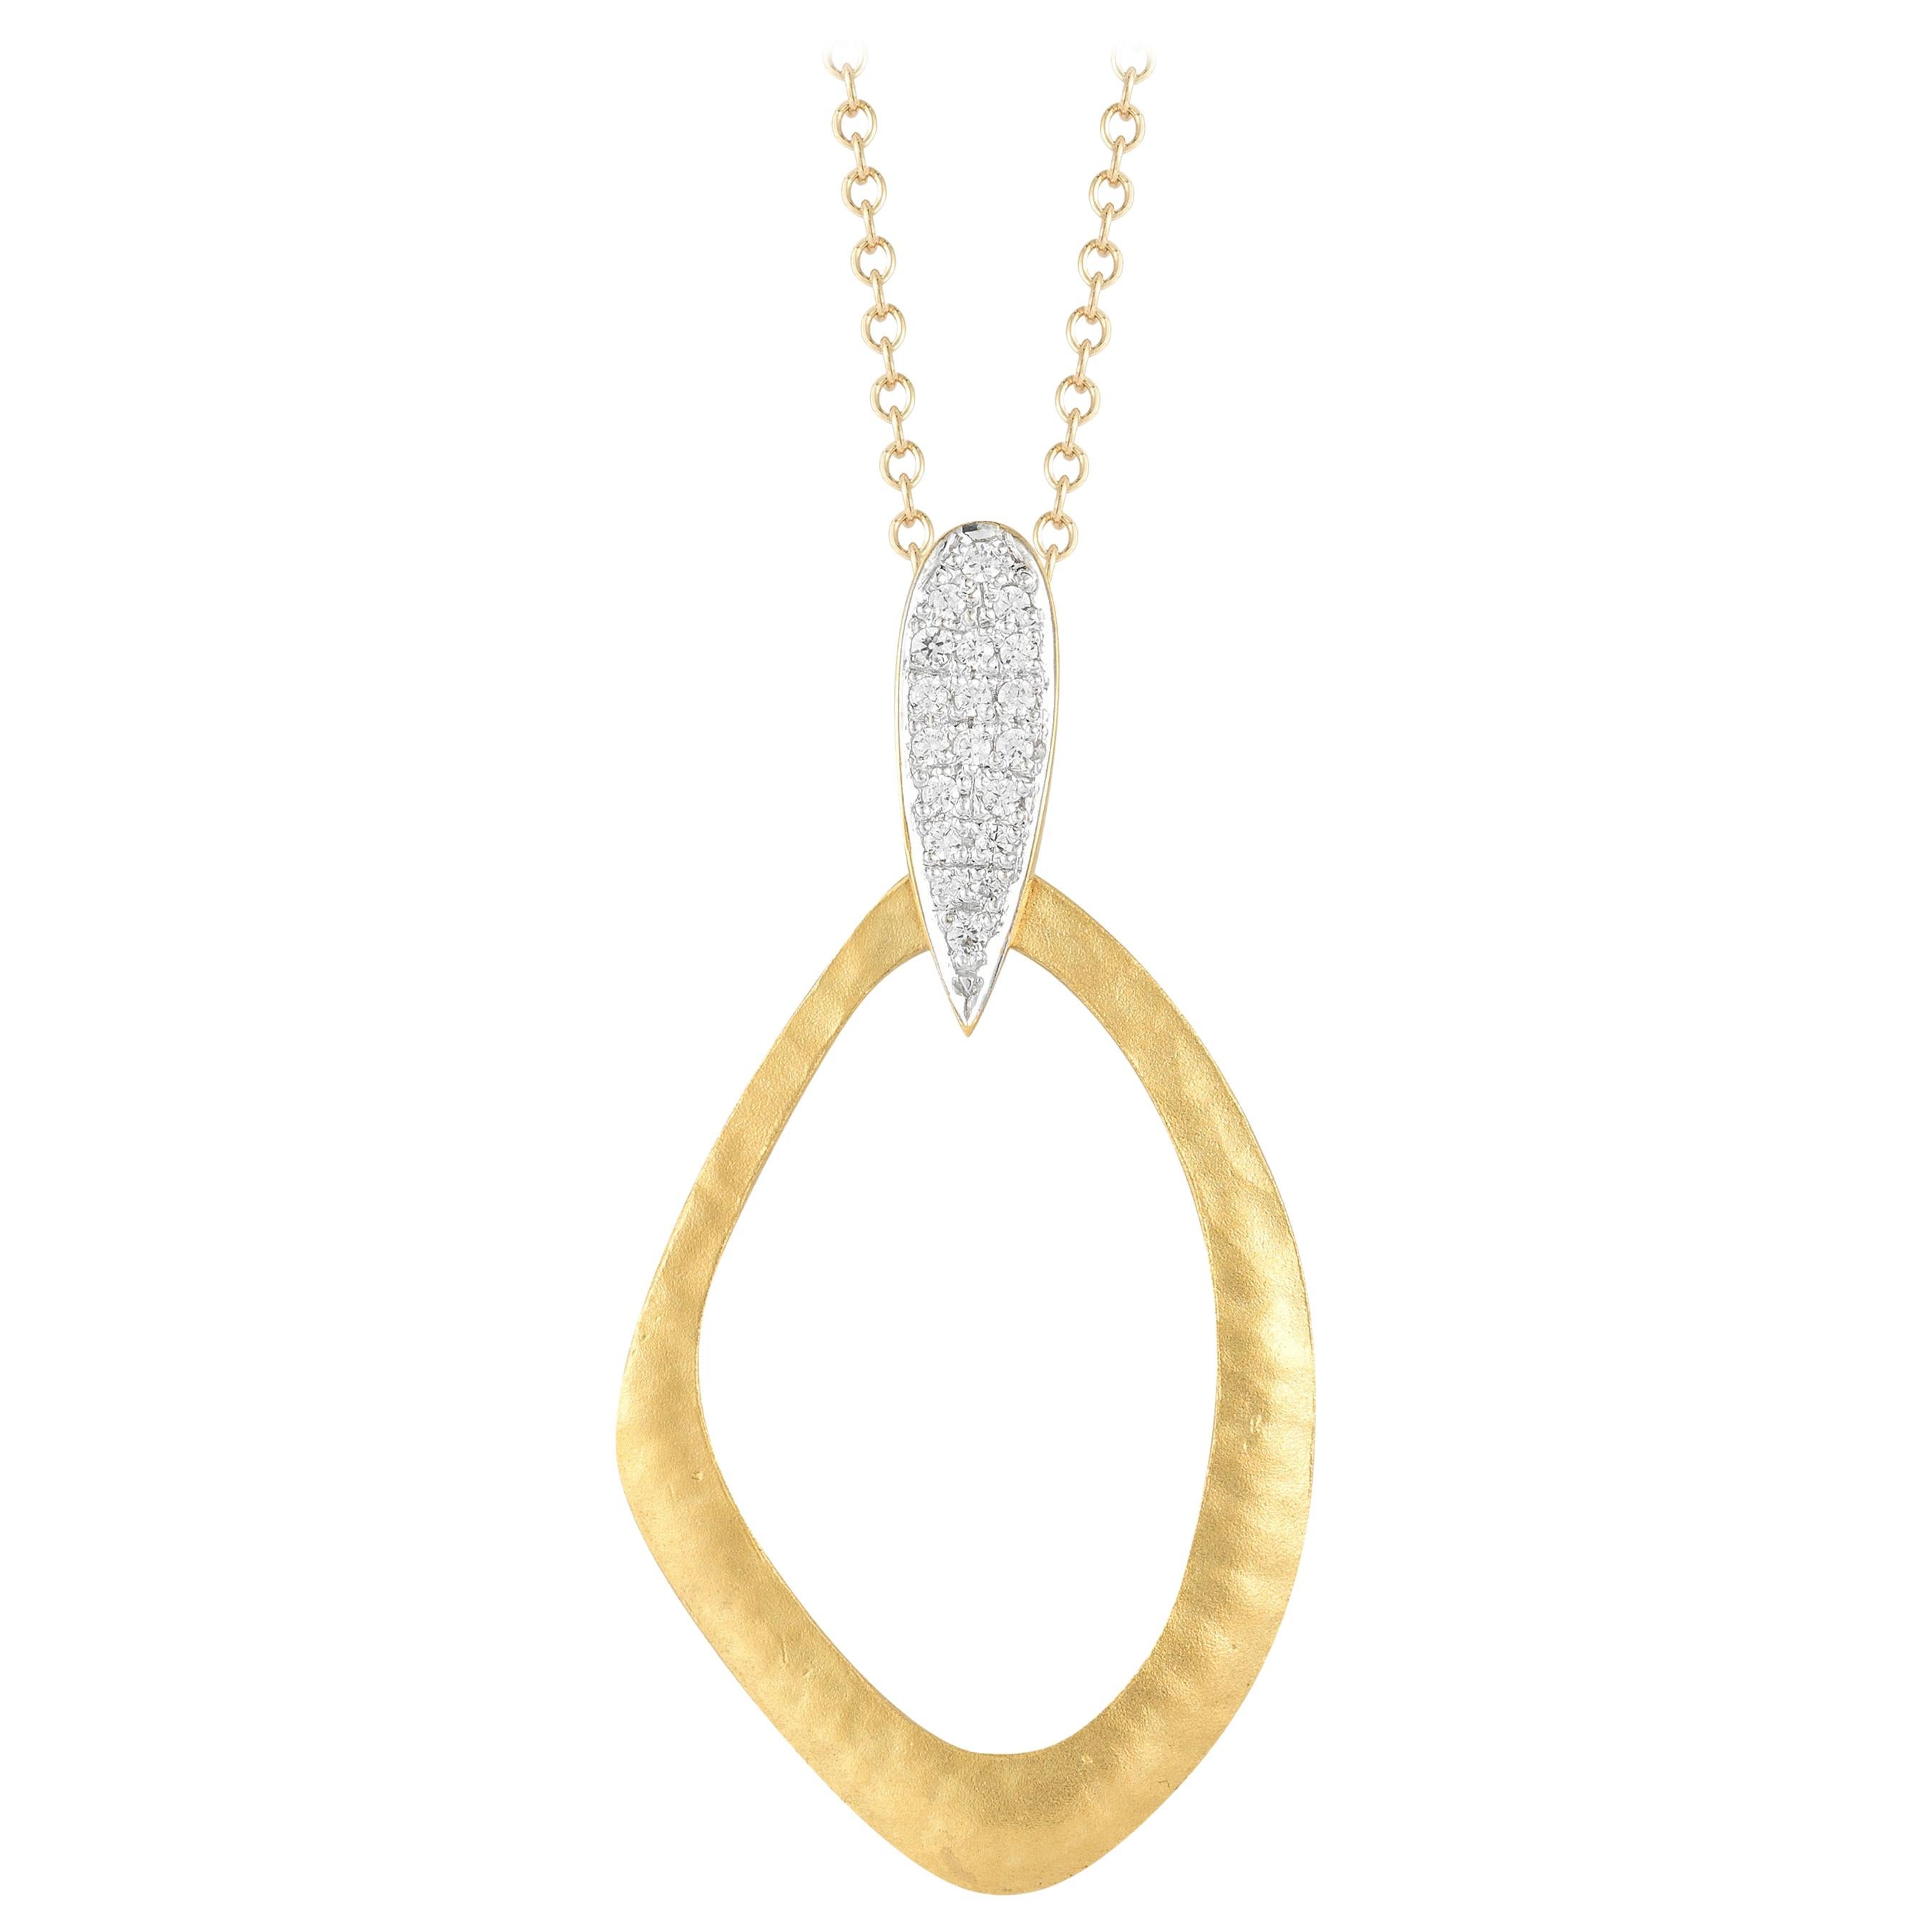 Handcrafted 14 Karat Yellow Gold Hammered Pendant Accented with Diamonds